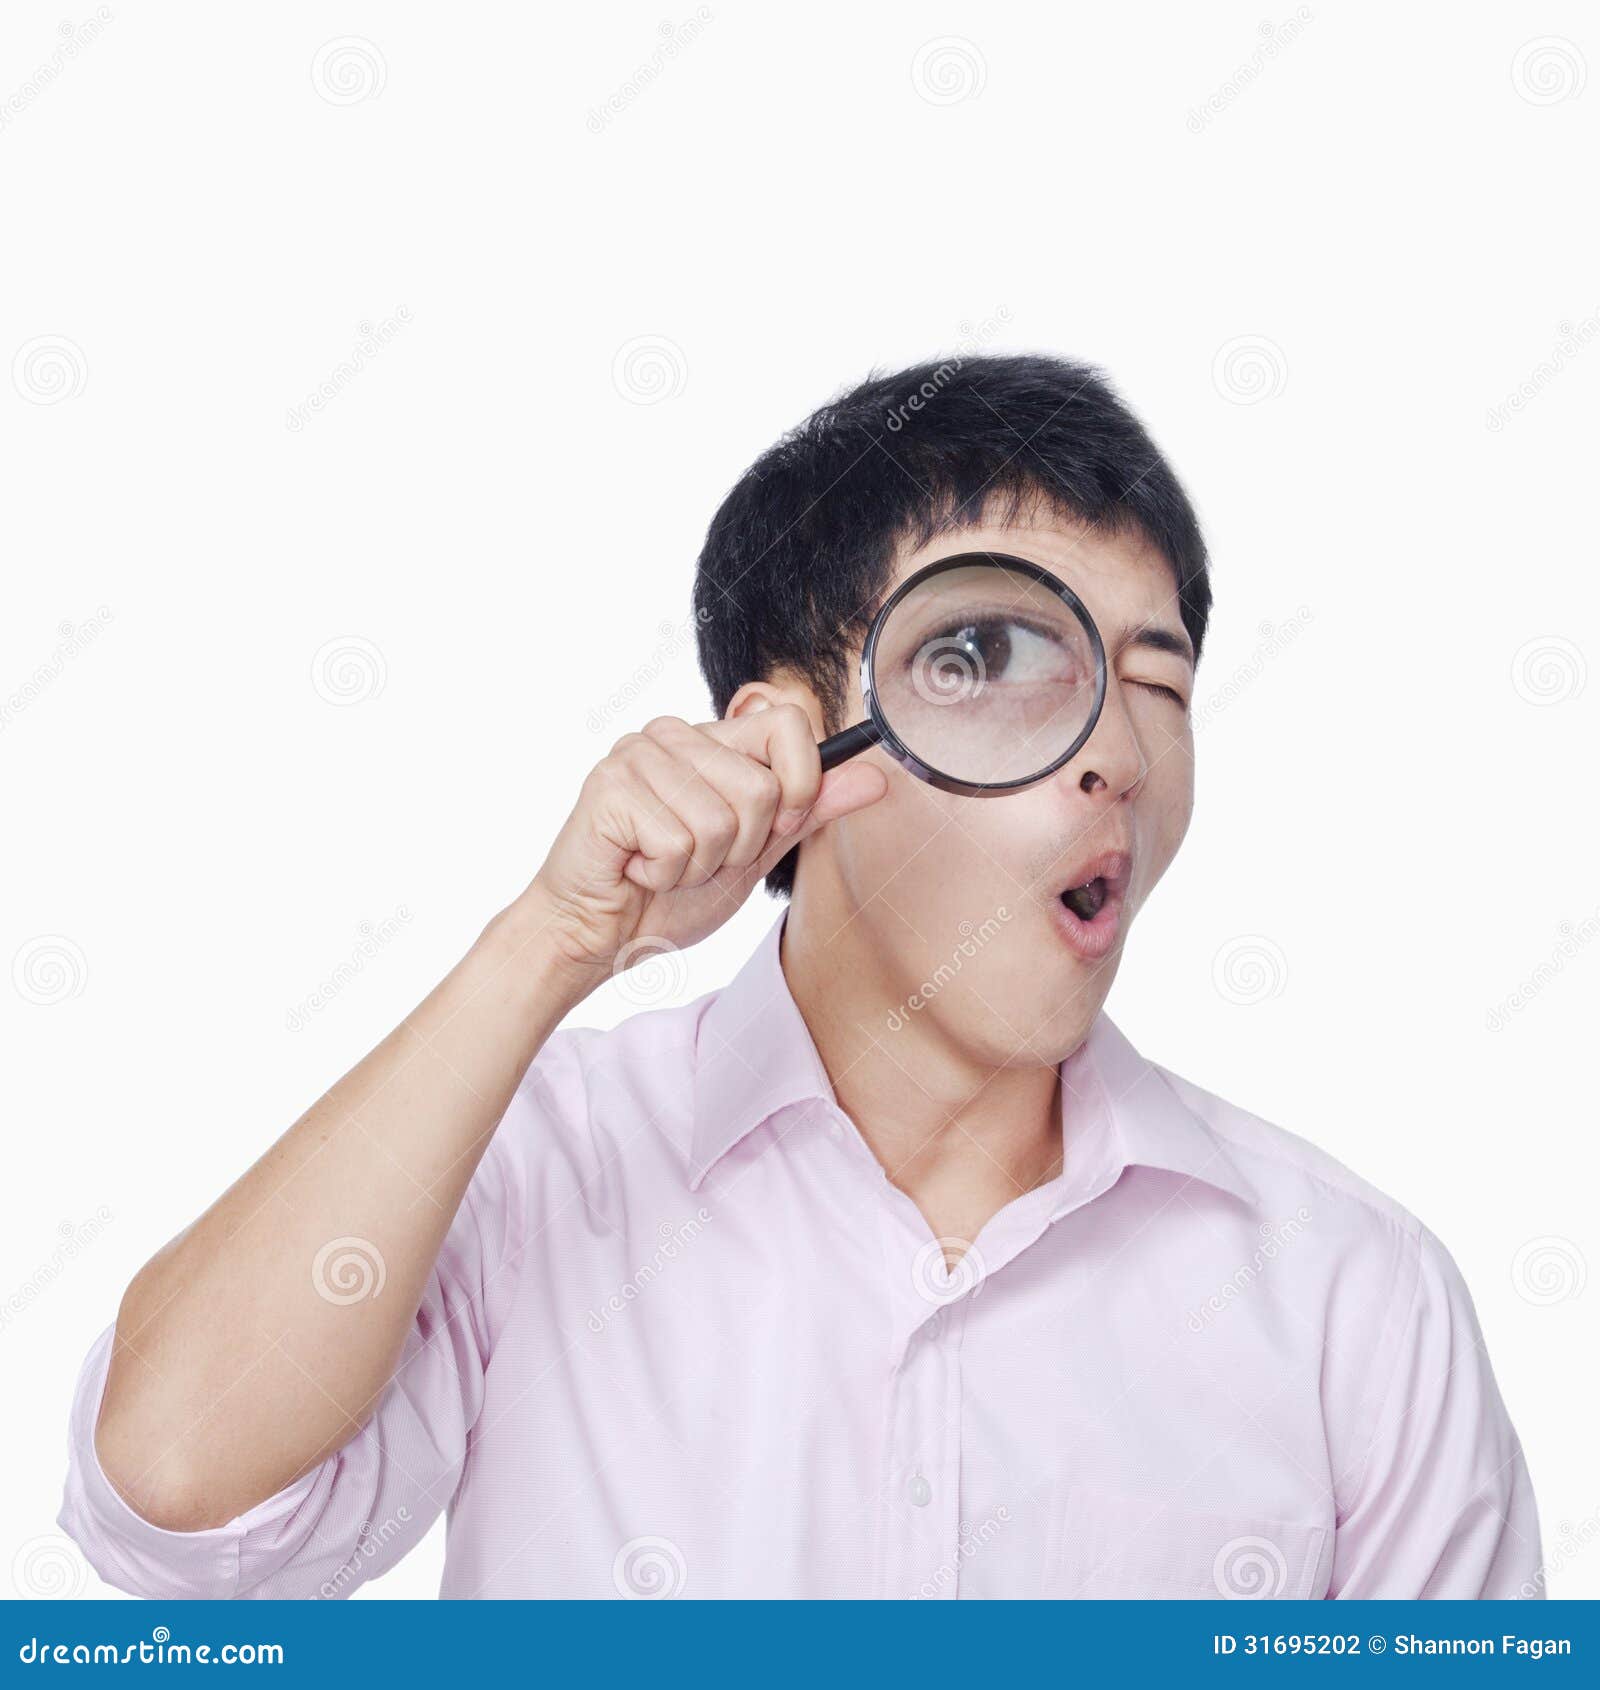 young-man-looking-magnifying-glass-31695202.jpg